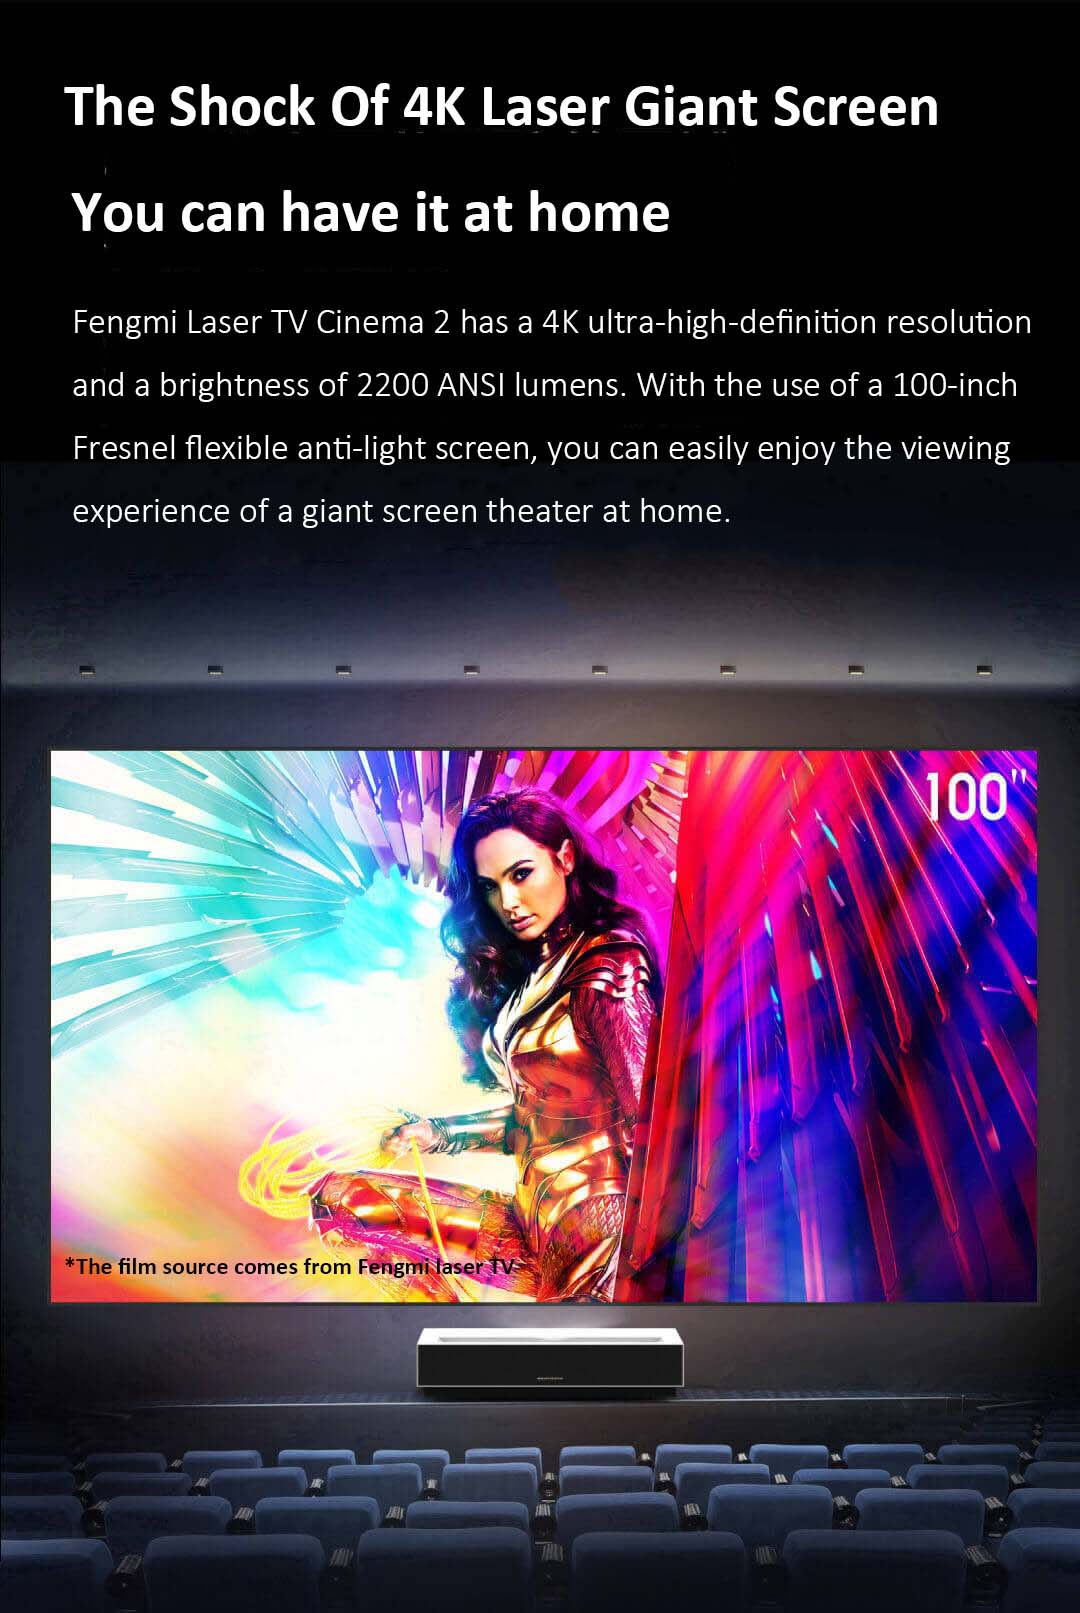 NEW-Fengmi-C2-Formovie-4K-Cinema-L-aser-Projector-2200-ANSI-Lumens-ALPD-30-5G-WiFi-Android-90-100-in-1845323-3